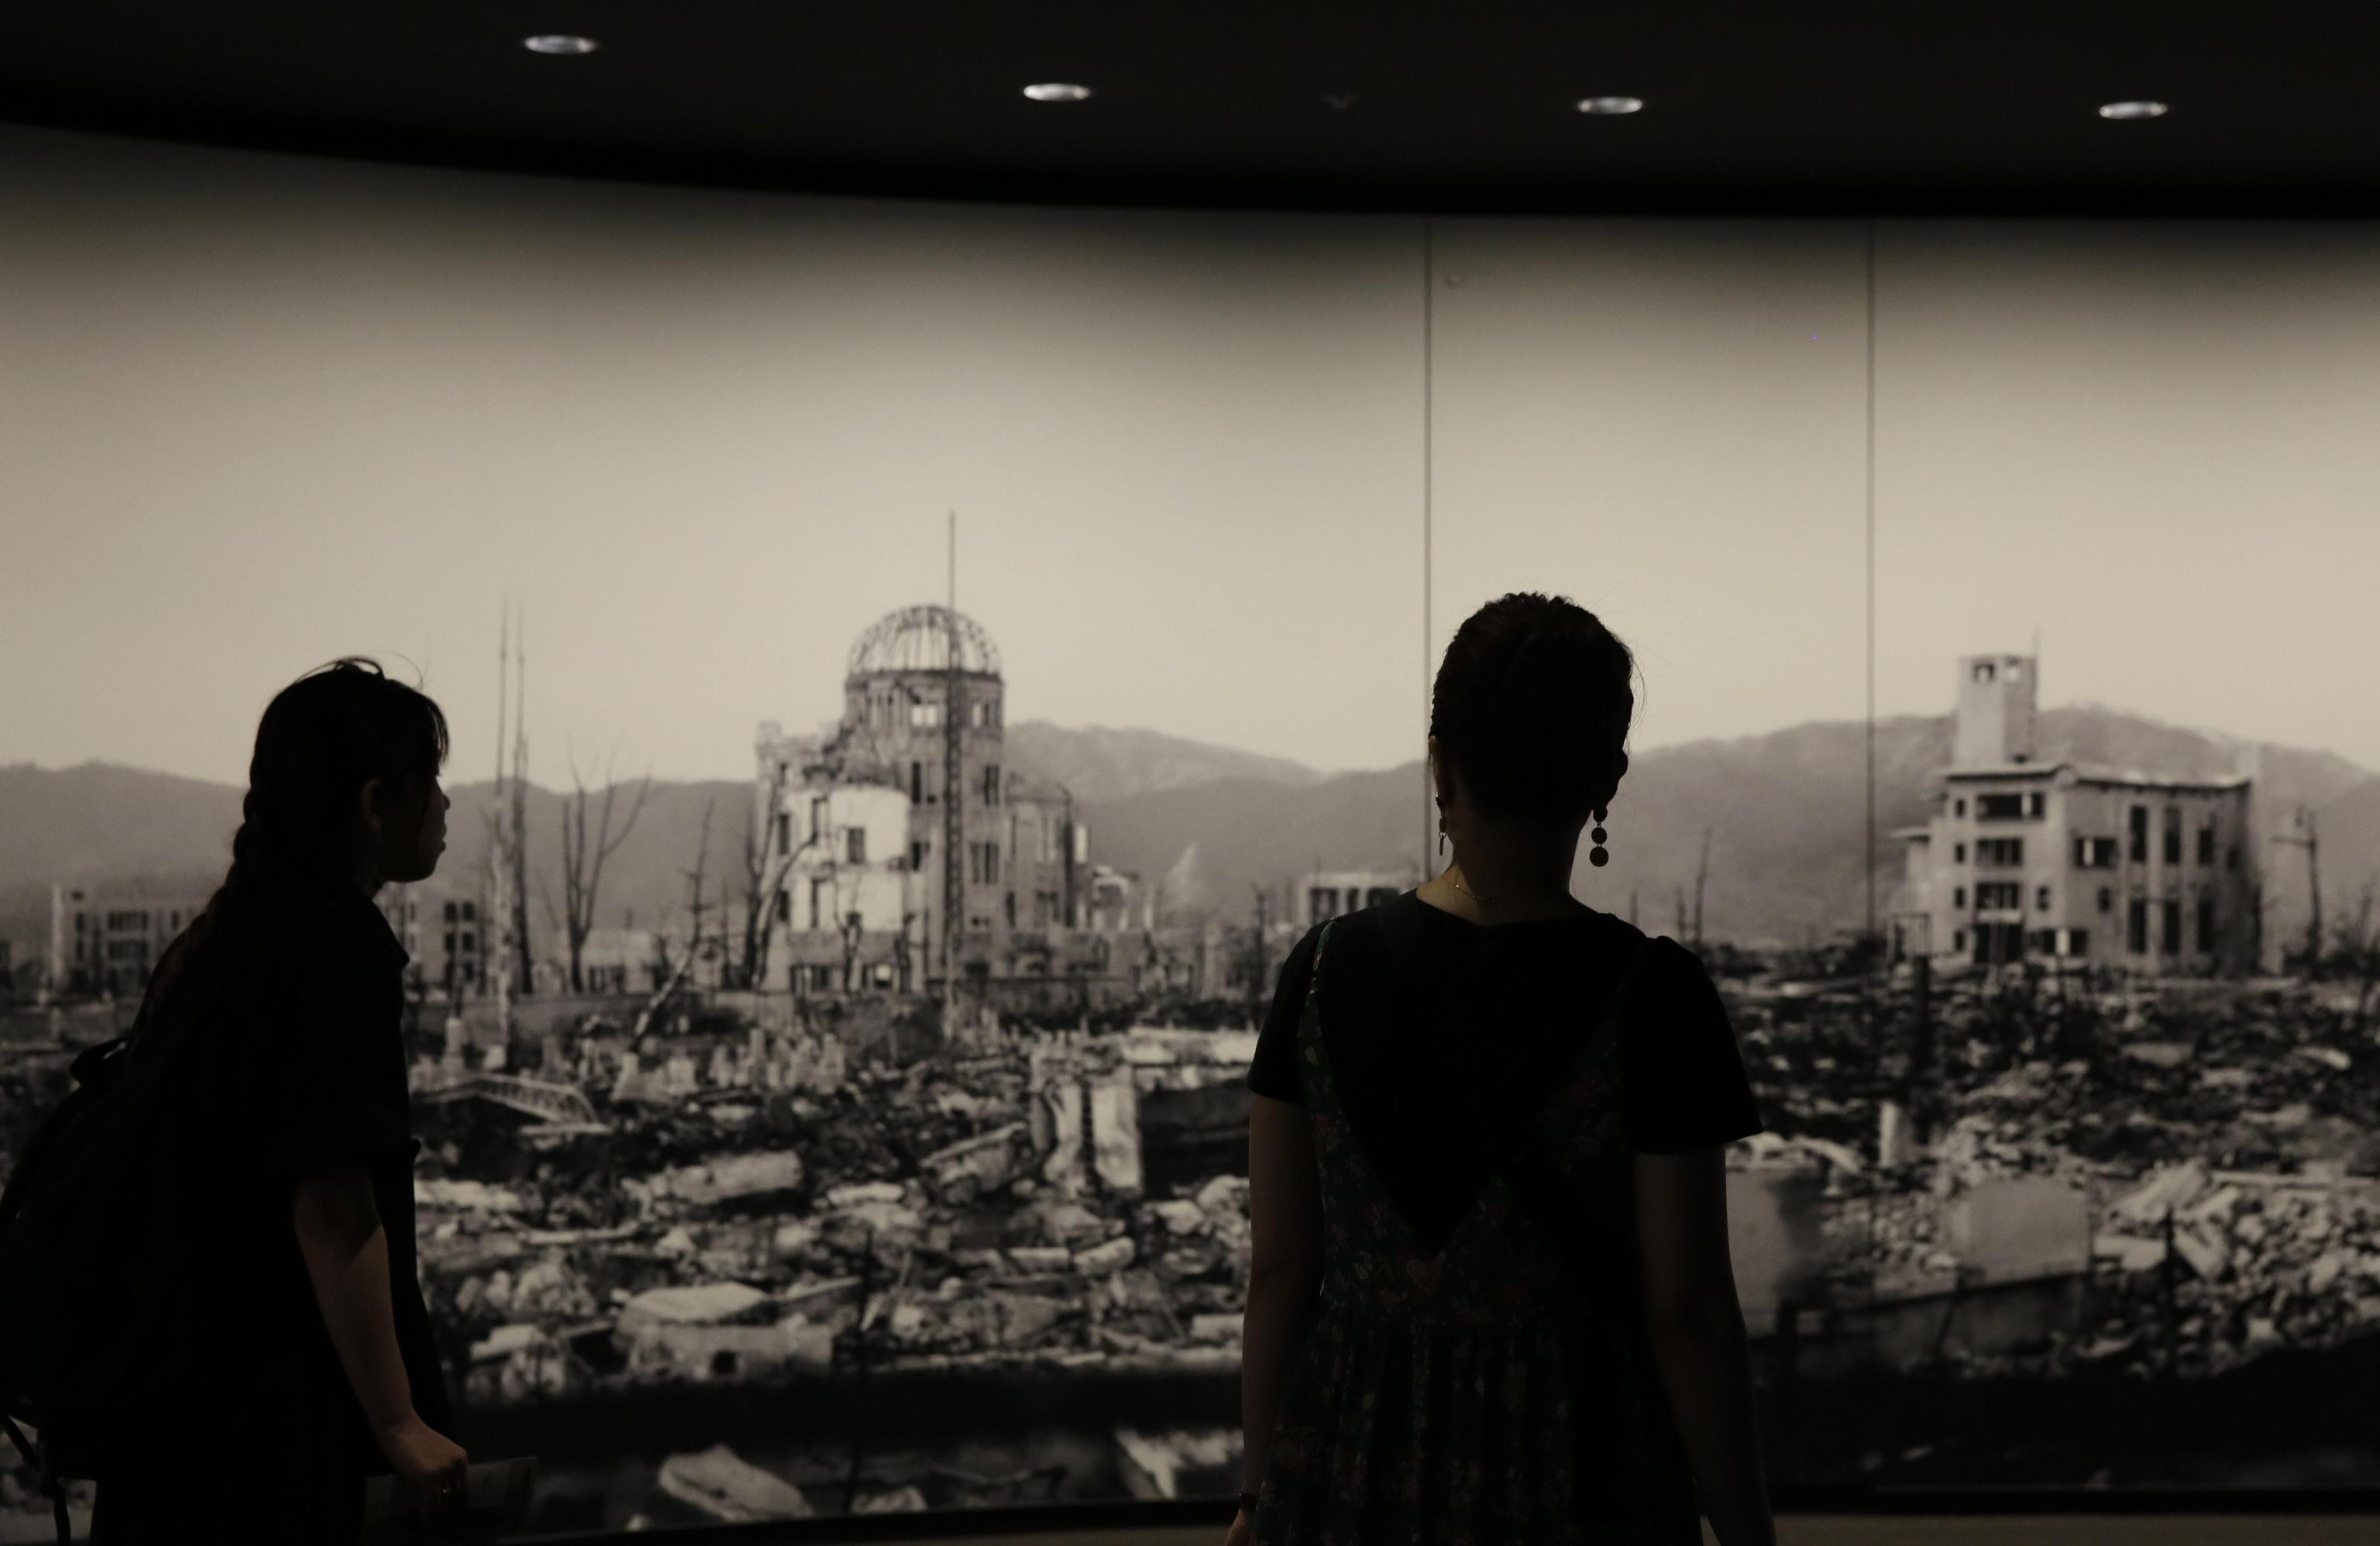 epa07839167 (FILE) - Visitors are watching a photo of the Atomic Bomb Dome and around the area devastated by the atomic bombing of Hiroshima in 1945 at Hiroshima Peace Memorial Museum  in Hiroshima, western Japan, 17 July 2019. The Vatican announced on 13 September 2019 Pope Francis will visit Japan from 23 to 26 November and the WWII atomic bombed cities of Hiroshima Nagasaki. The Pope's visit to Japan will be for the first time since John Paul II visited in 1981. Fuji died at the age of 42 in 1977.  EPA/KIMIMASA MAYAMA